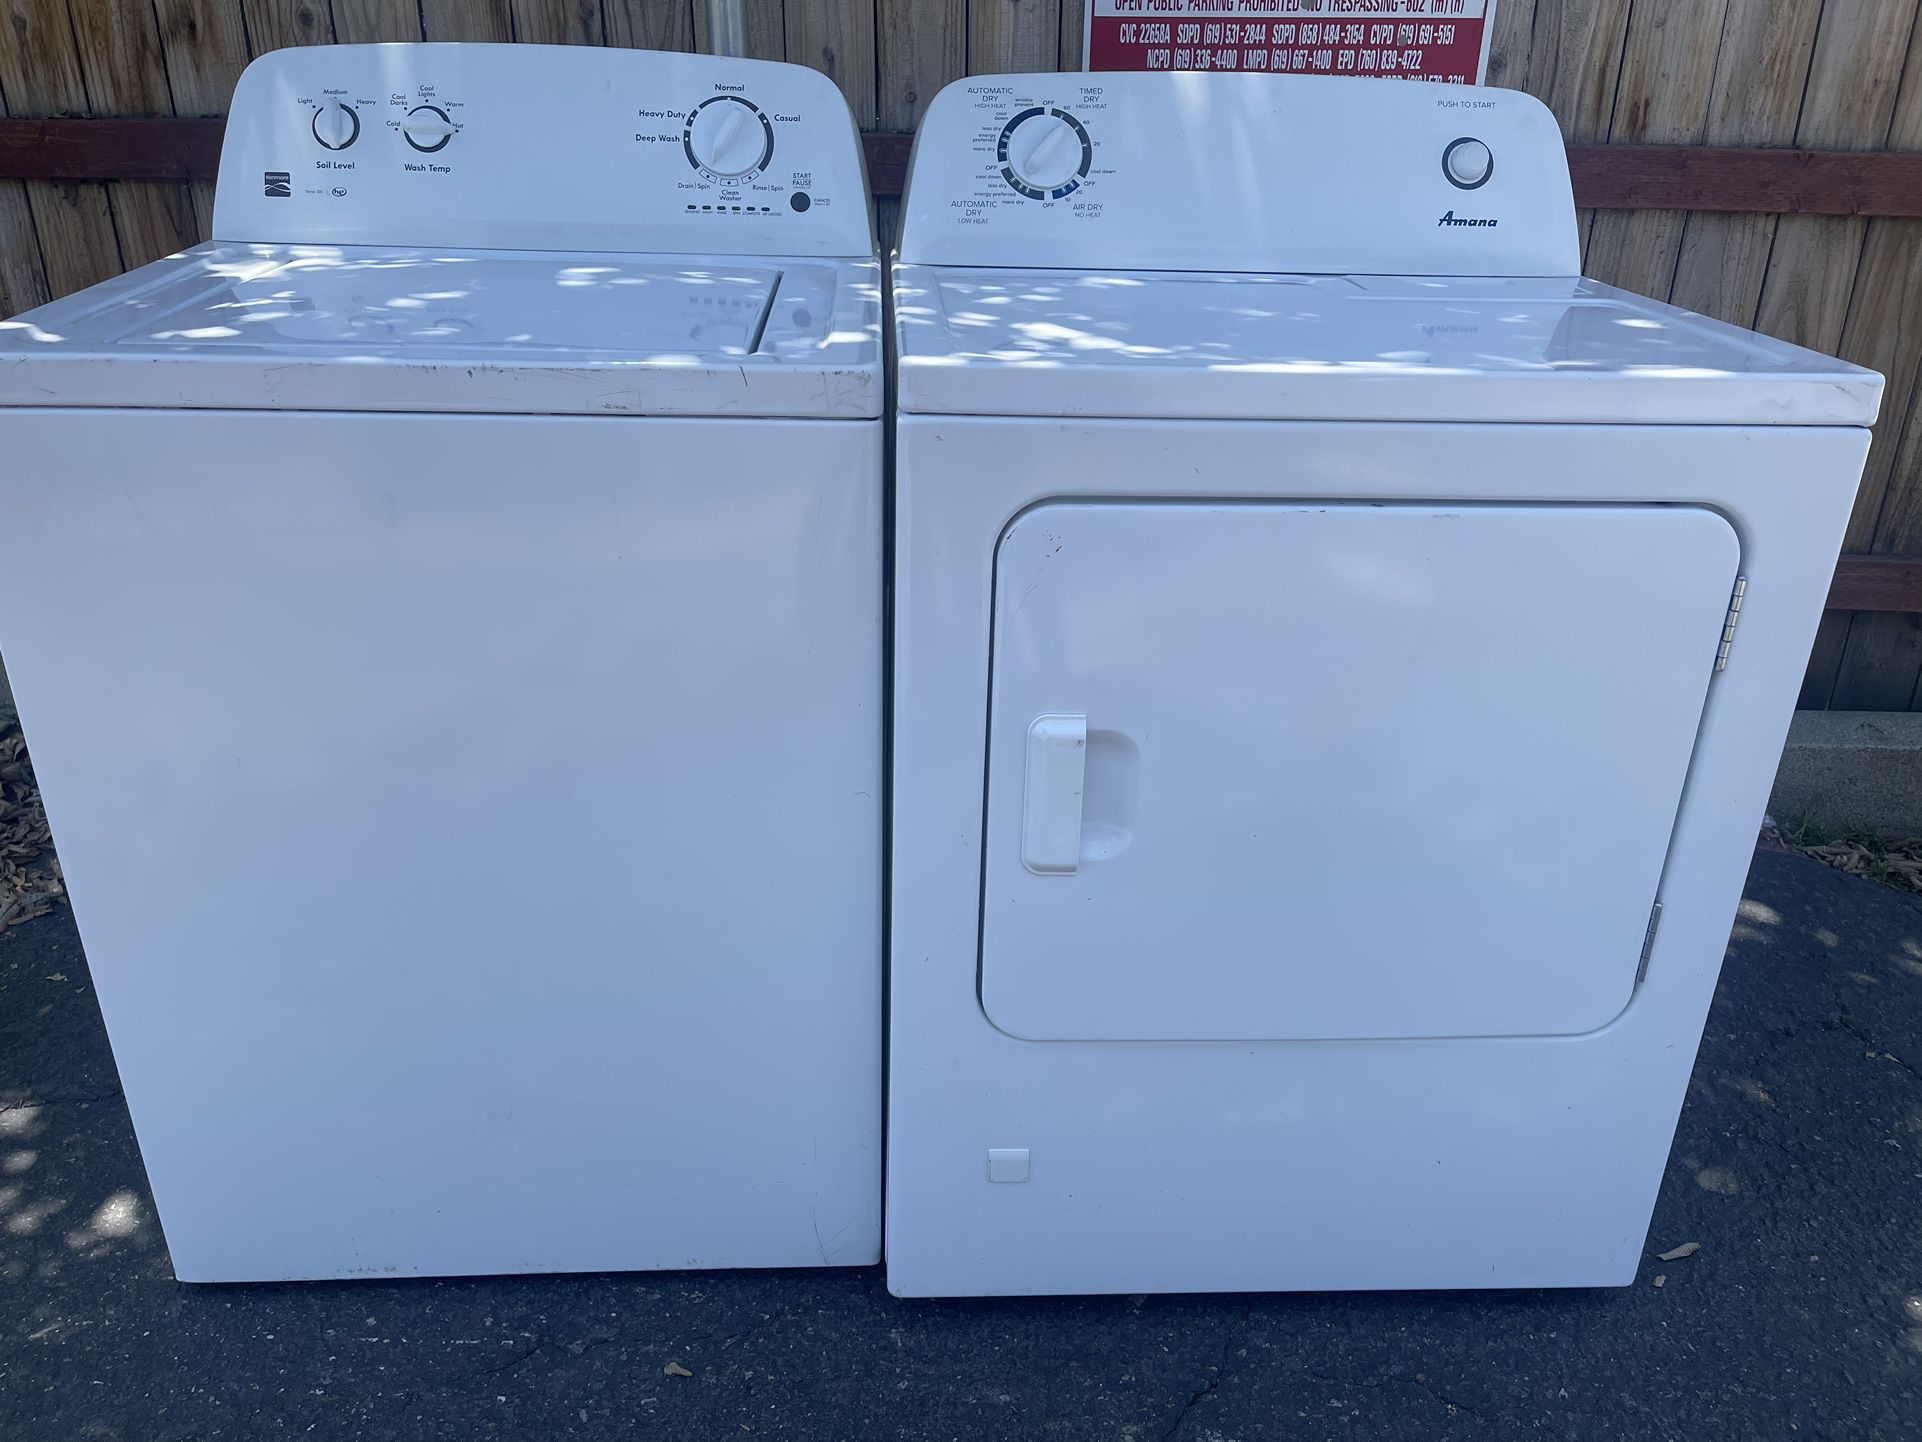 Kenmore Washer and Gas Dryer